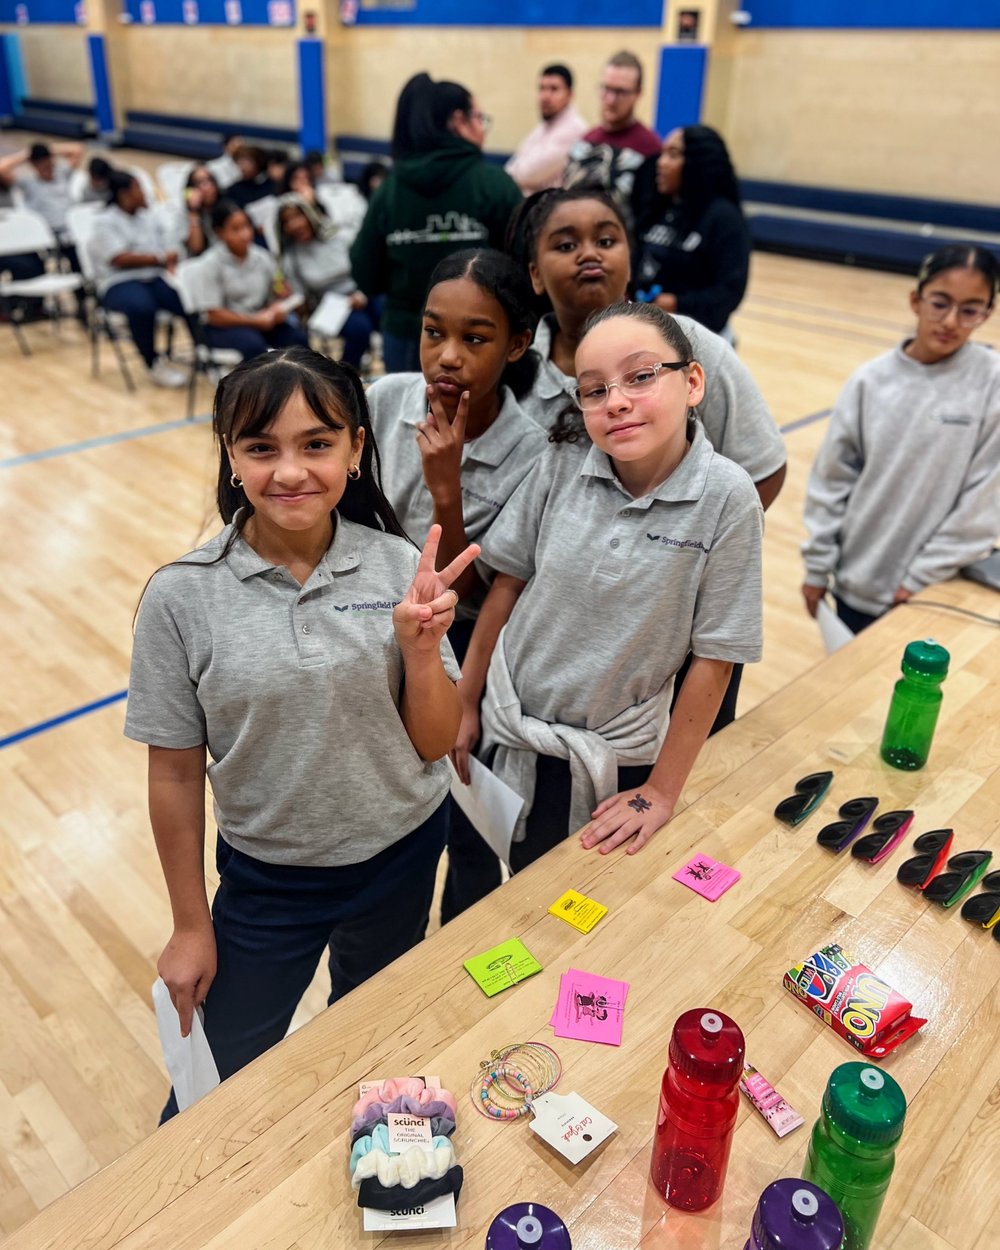  Twice a year, at our middle school auction, scholars get to buy prizes with the “prep points” they’ve earned for positive behavior. Some prizes include water bottles, accessories, pizza &amp; donut raffles, and the most popular of all - a ticket to 